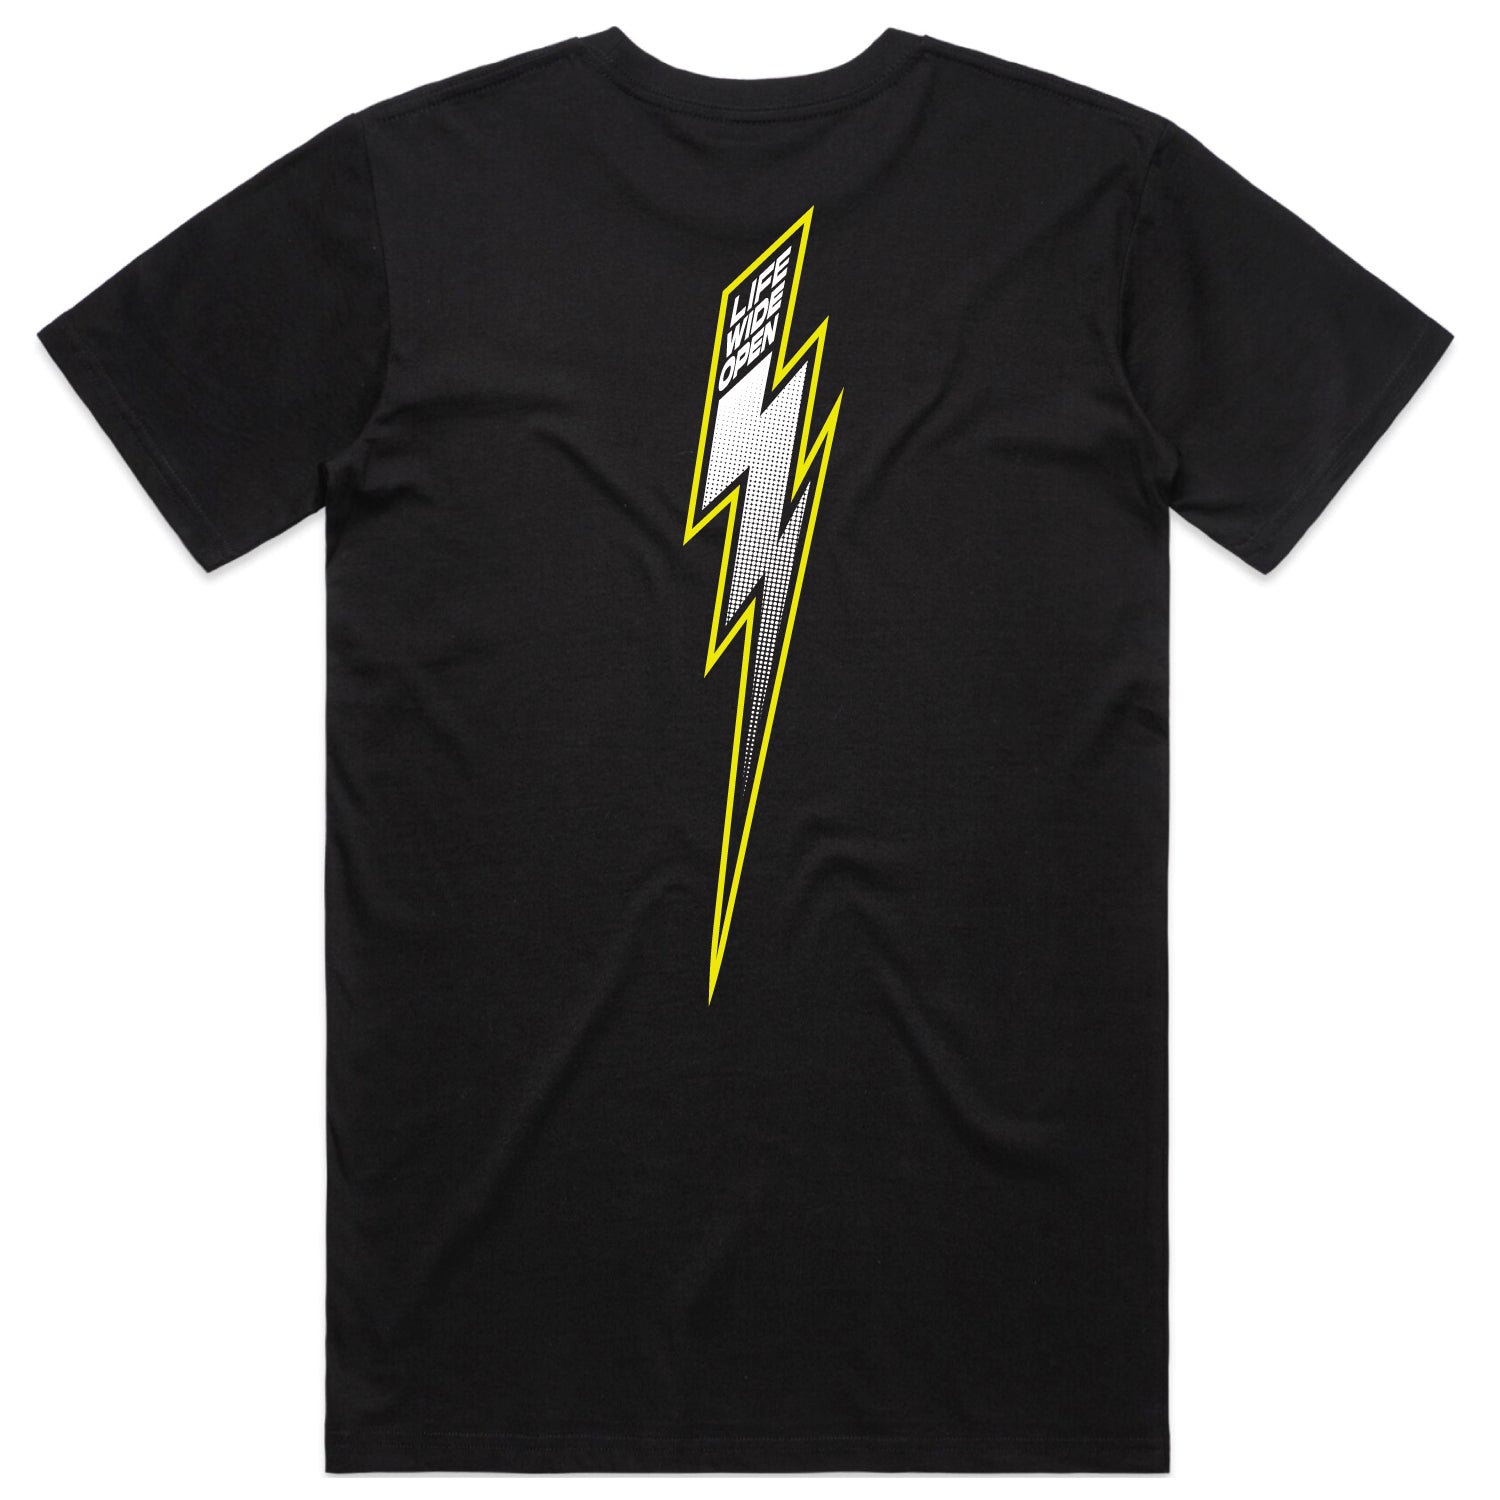 Fully Charged T-shirt